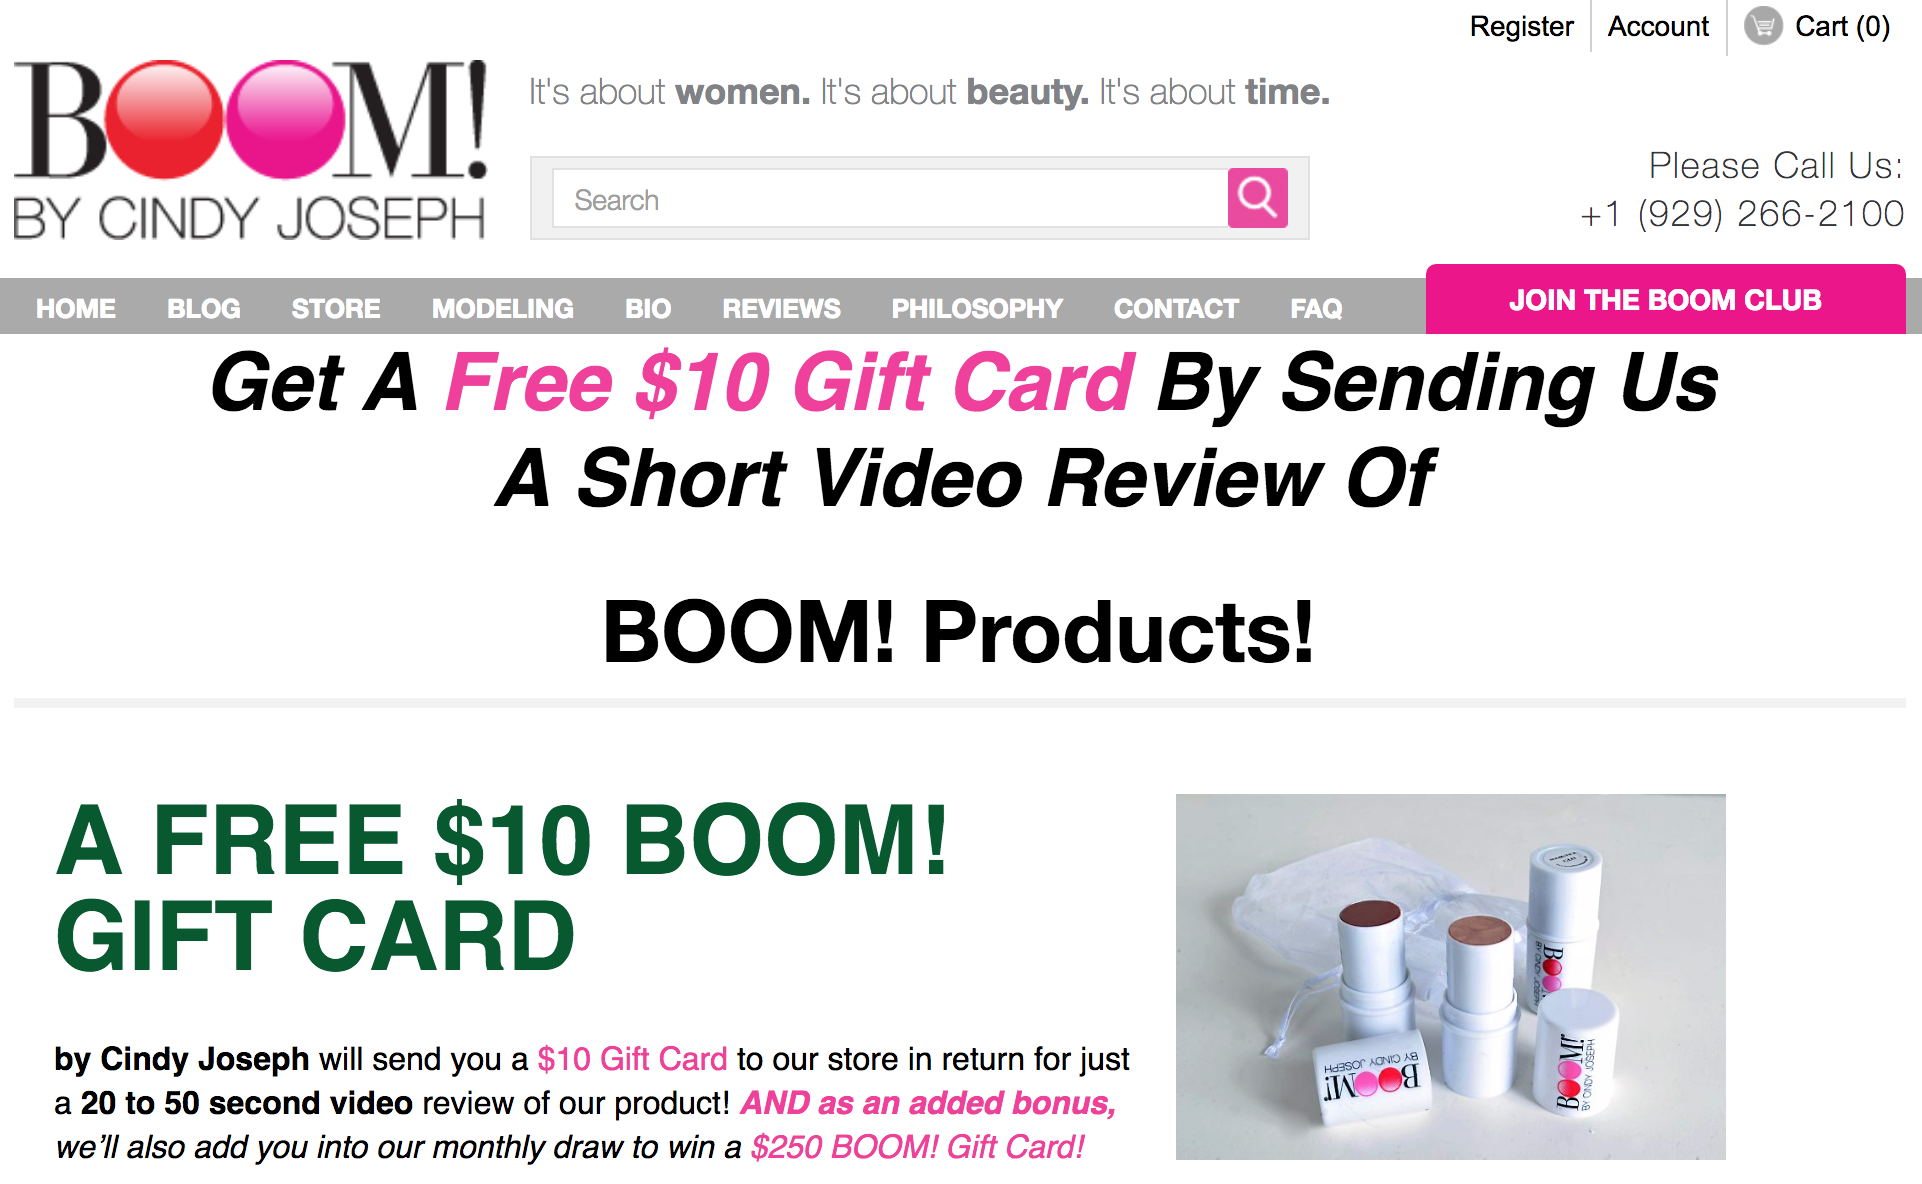 Screenshot showing a gift card offer by BOOM! by Cindy Joseph